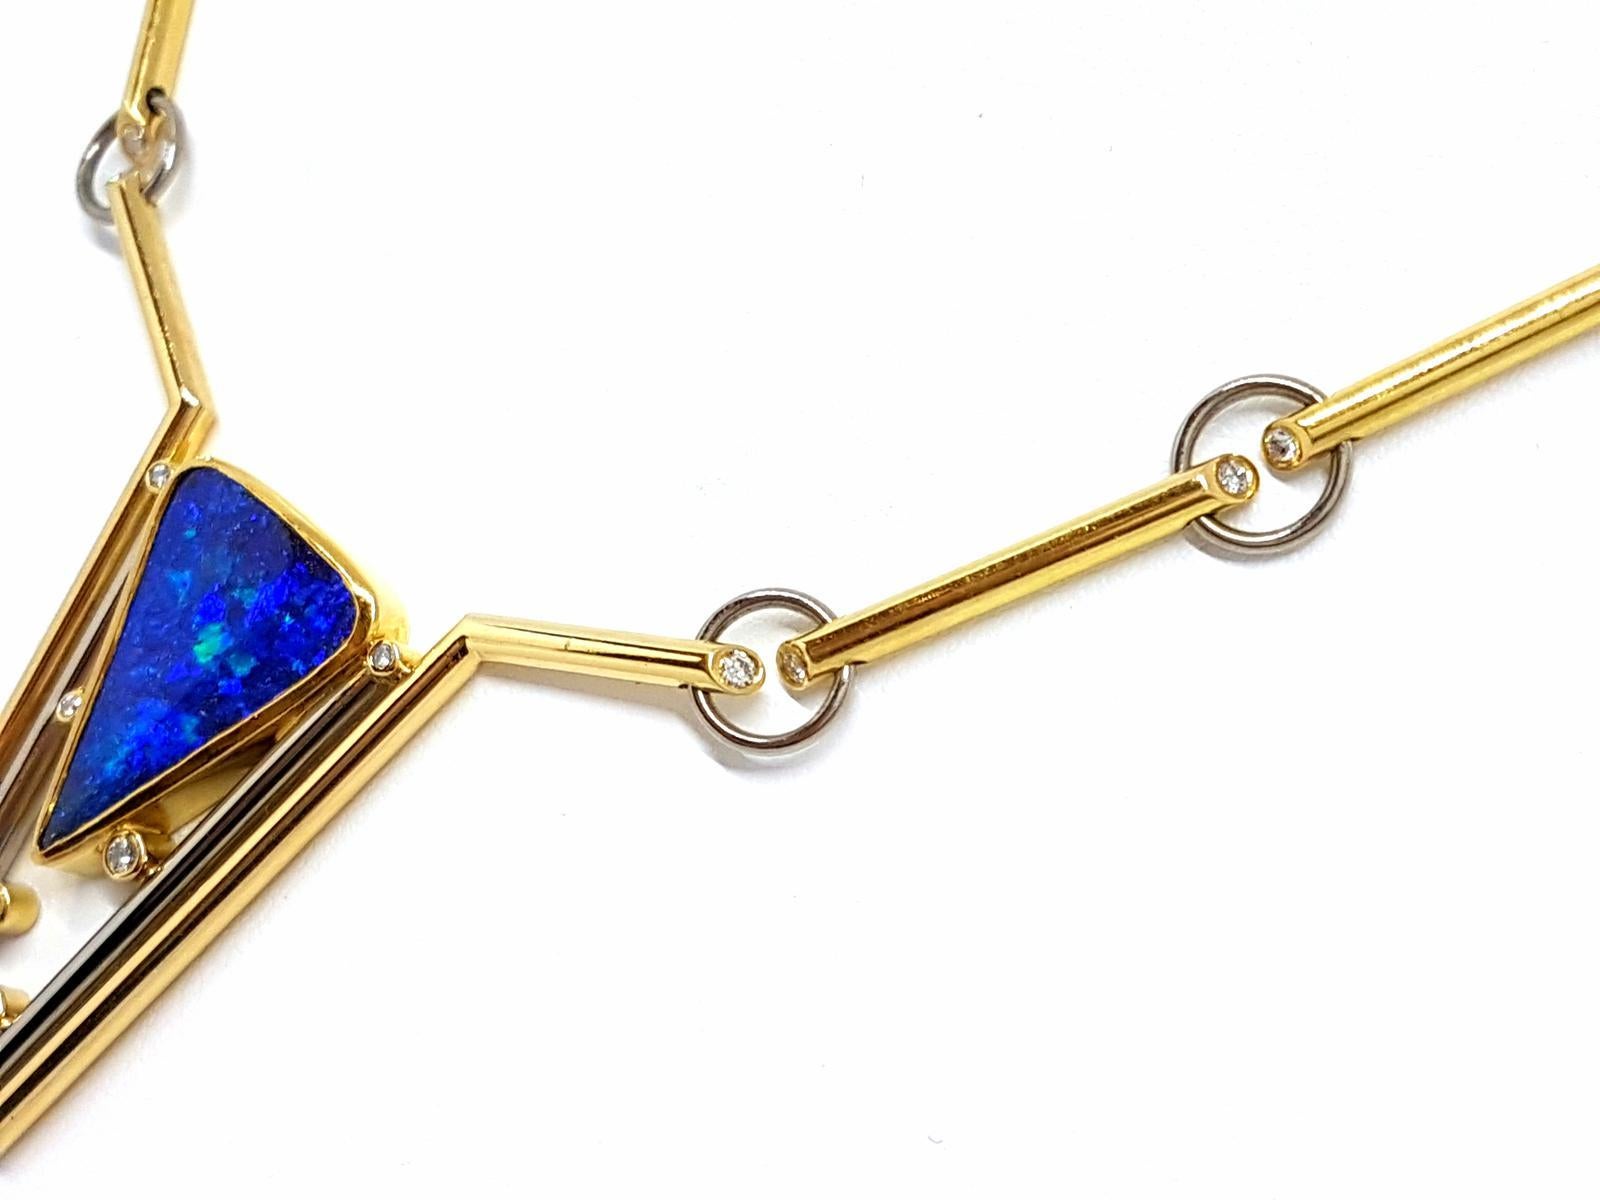 Bicolor collar in yellow gold and white gold 18k compound of a triangle pattern Opal (1.5 cm x 2.2 cm) with diamonds brilliant cut about 0.12 ct total collar length: 42 cm. pendant length: 6 cm. punched. Weight: 51.80 g. excellent condition
